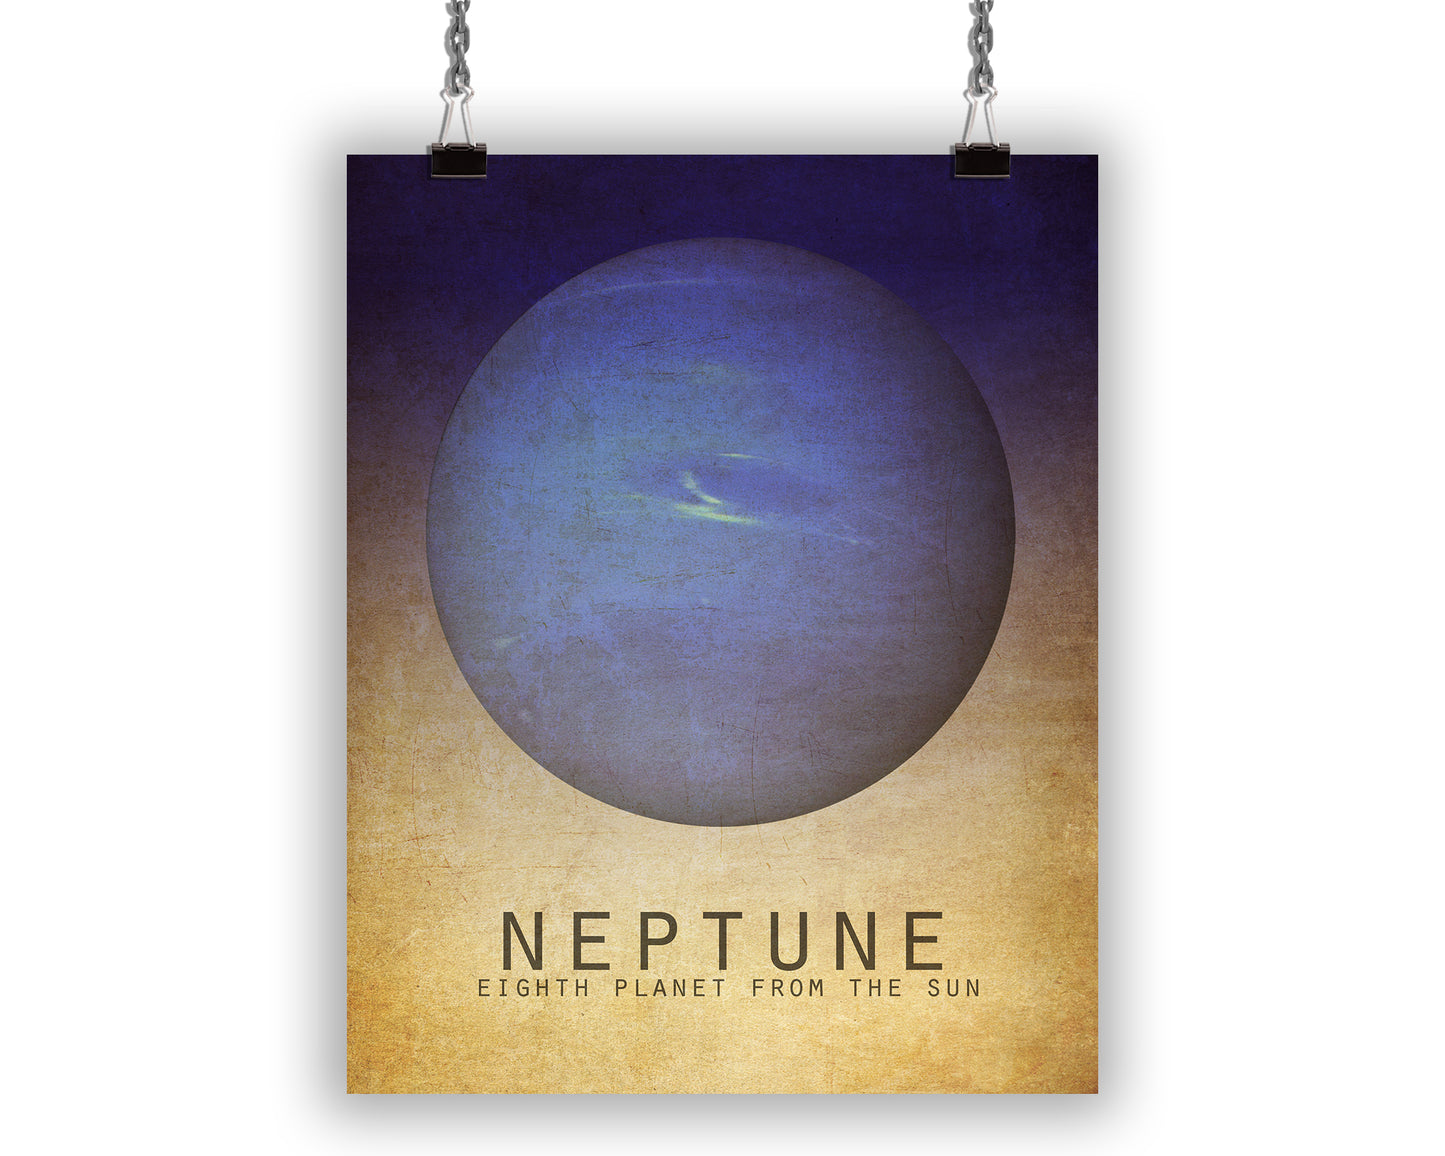  art print featuring a blue-colored minimalist image of Neptune, the eighth planet from the sun